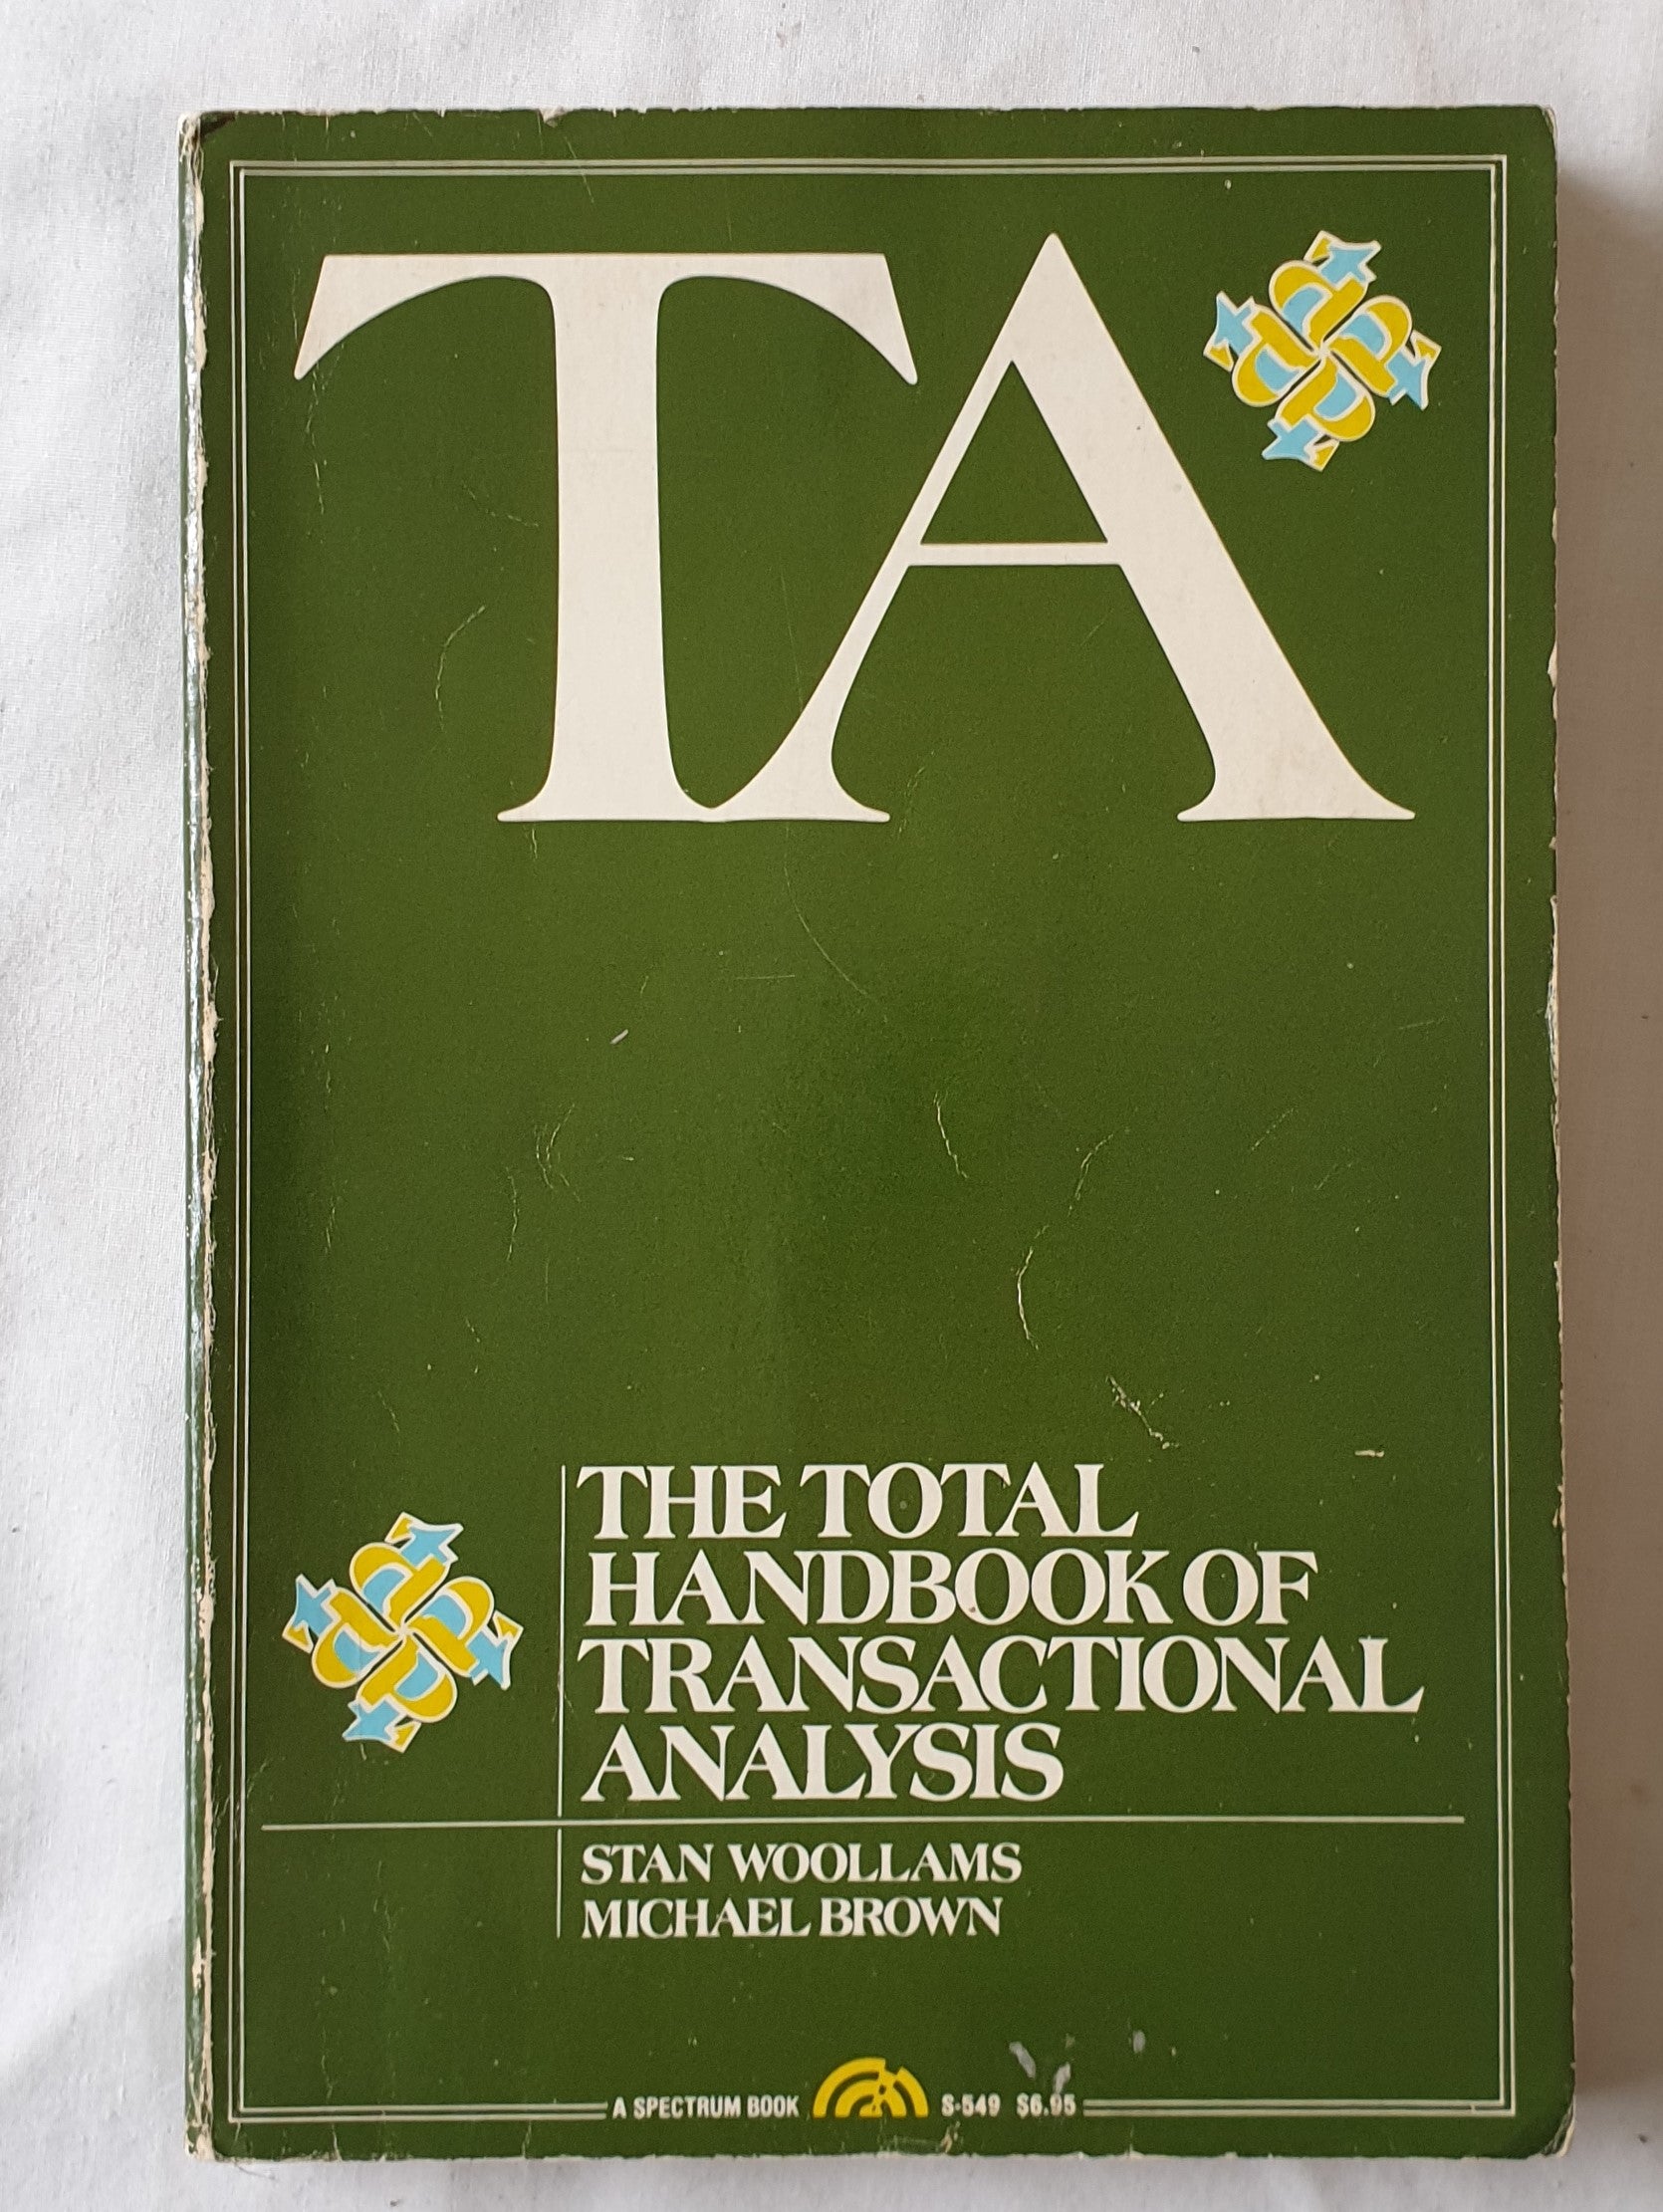 TA The Total Handbook of Transactional Analysis by Stan Woollams and Michael Brown